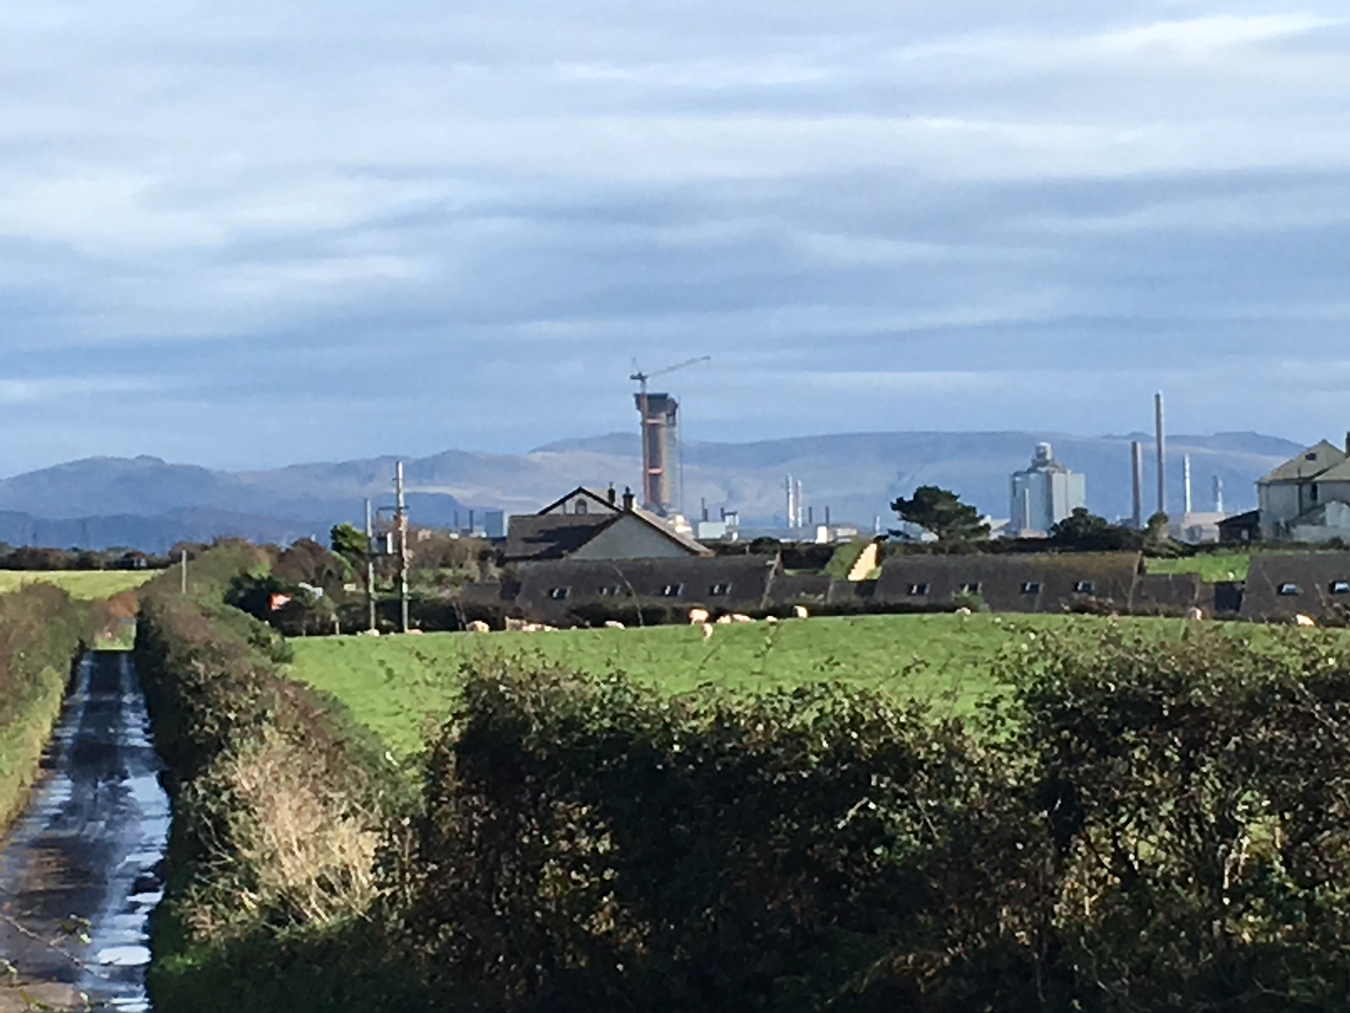 Sellafield site in its agricultural West Cumbrian habitat, with a farm in the foreground and Lake District fells in the background, just after the rain, 2019. Photo by Petra Tjitske Kalshoven.